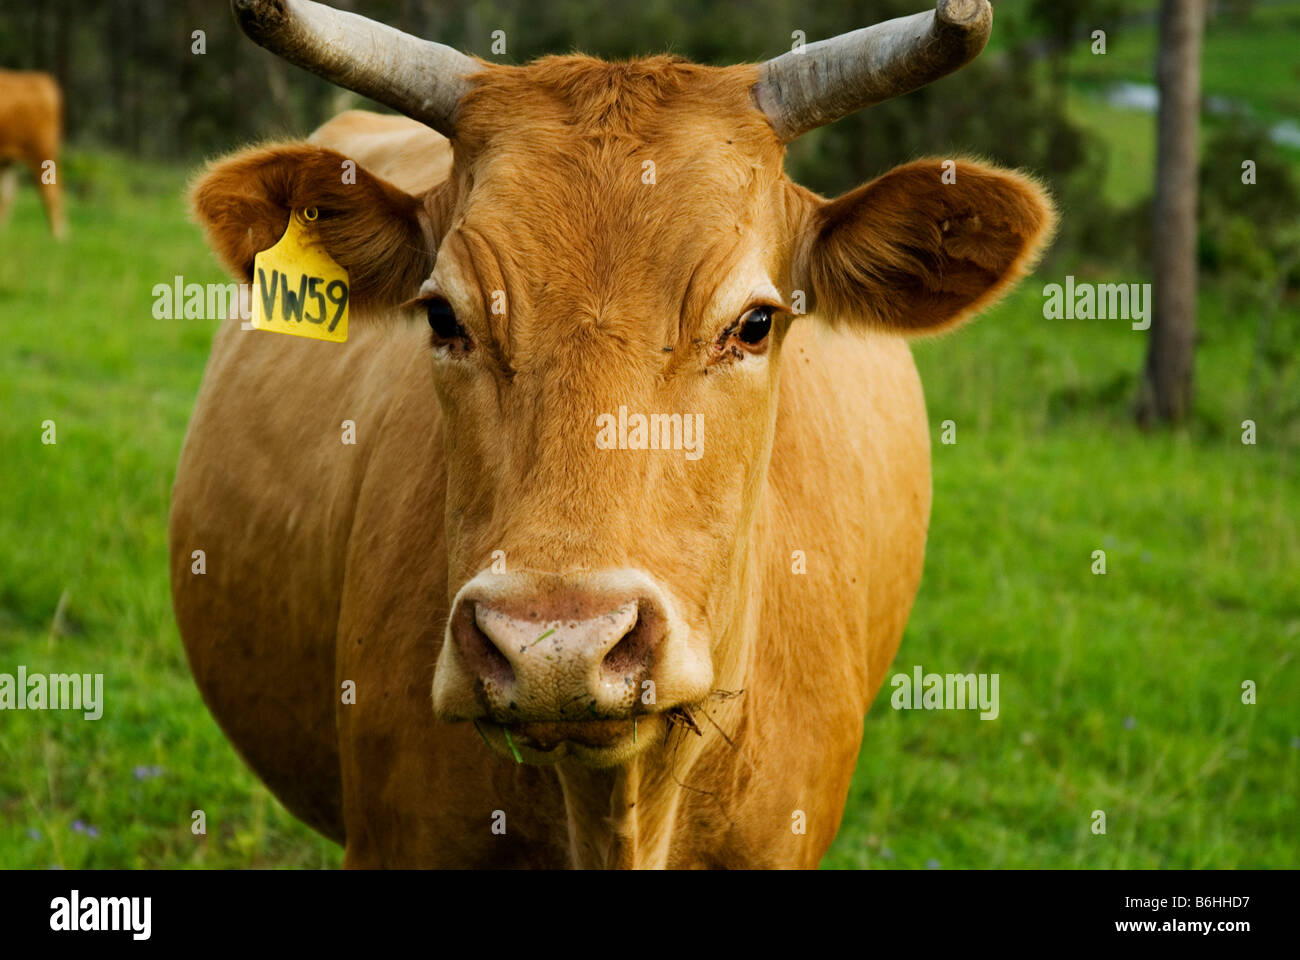 Red Angus cow, Old Hidden Vale Station, Queensland, Australia Stock Photo